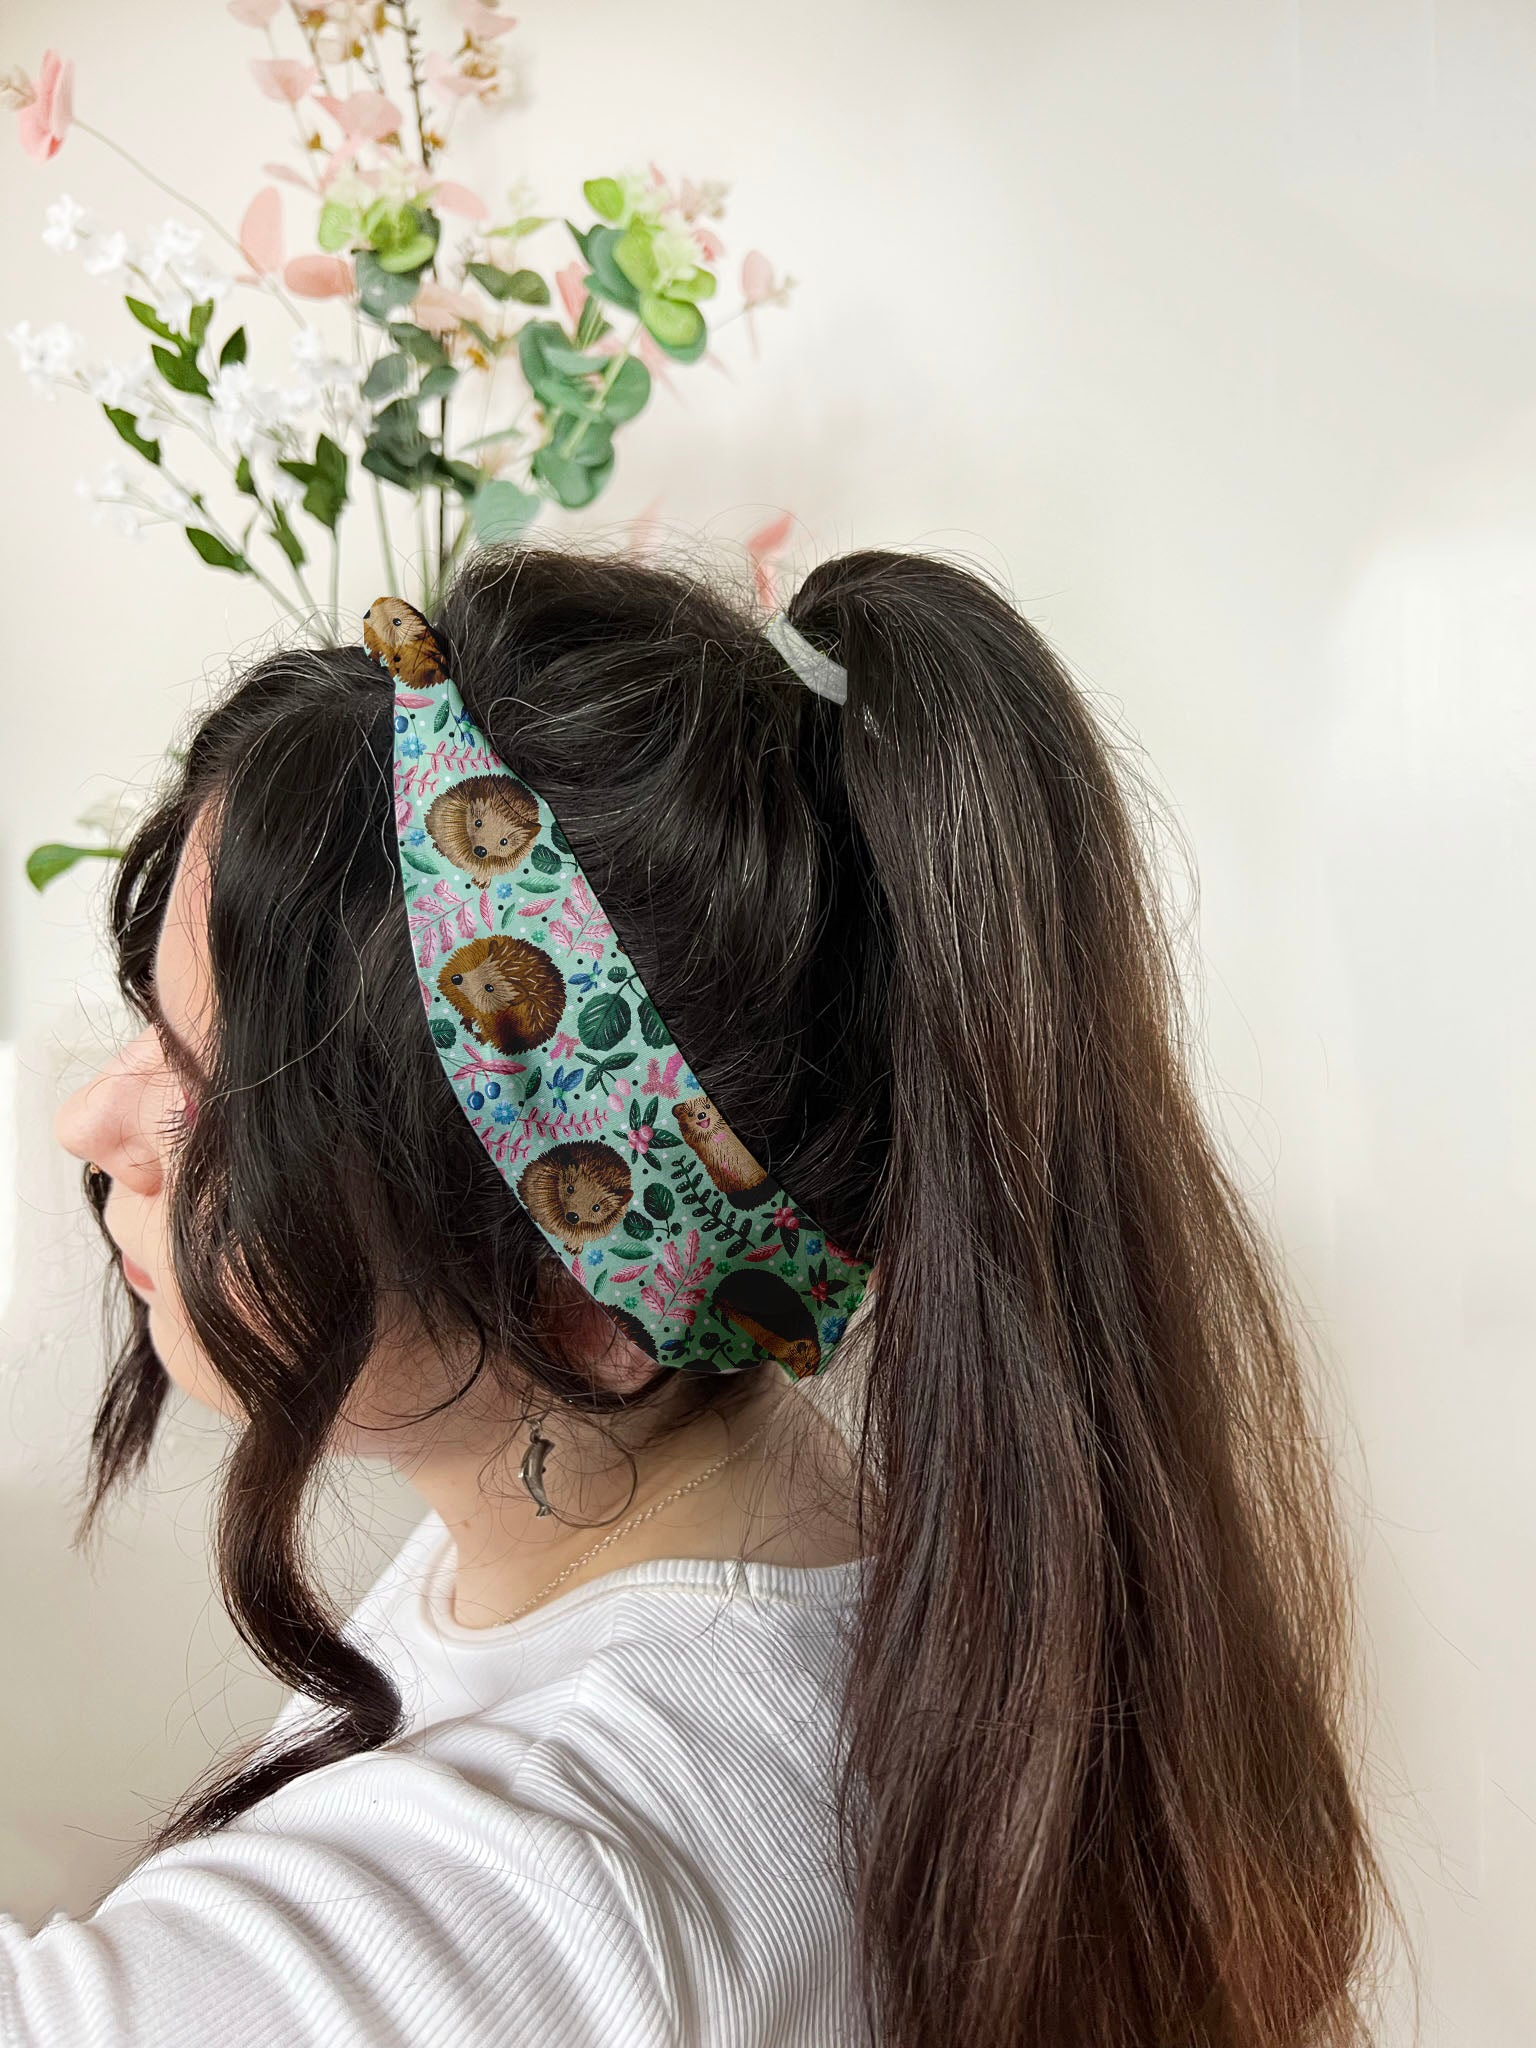 dark haired girl with hedgehog patterned headband, an ideal hedgehog hair accessory for the lover of hedgehogs.